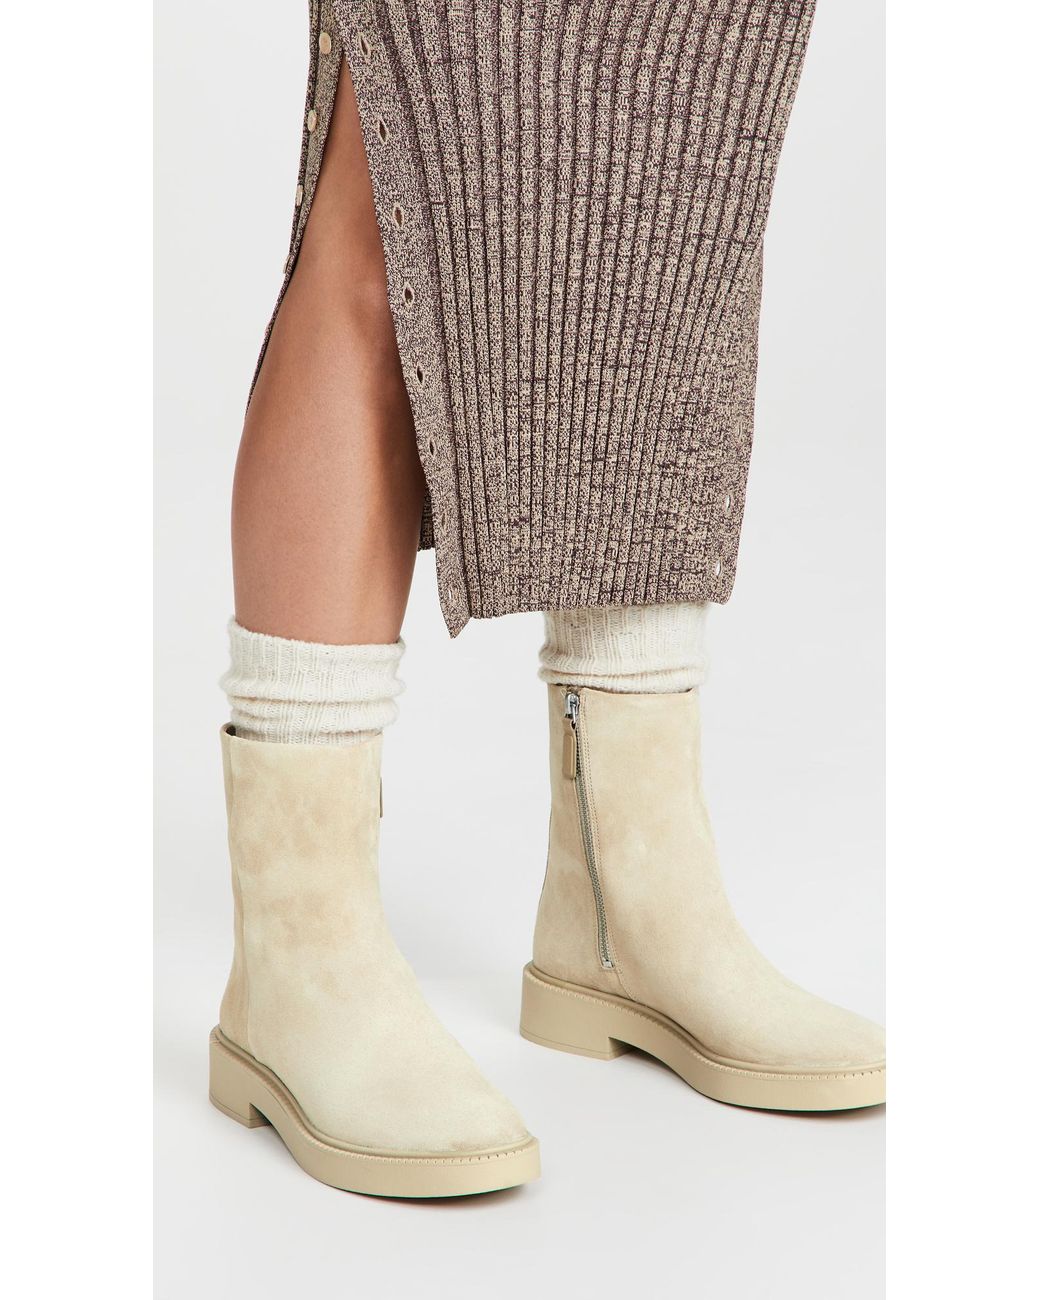 InneVince Kady Suede Low Boot